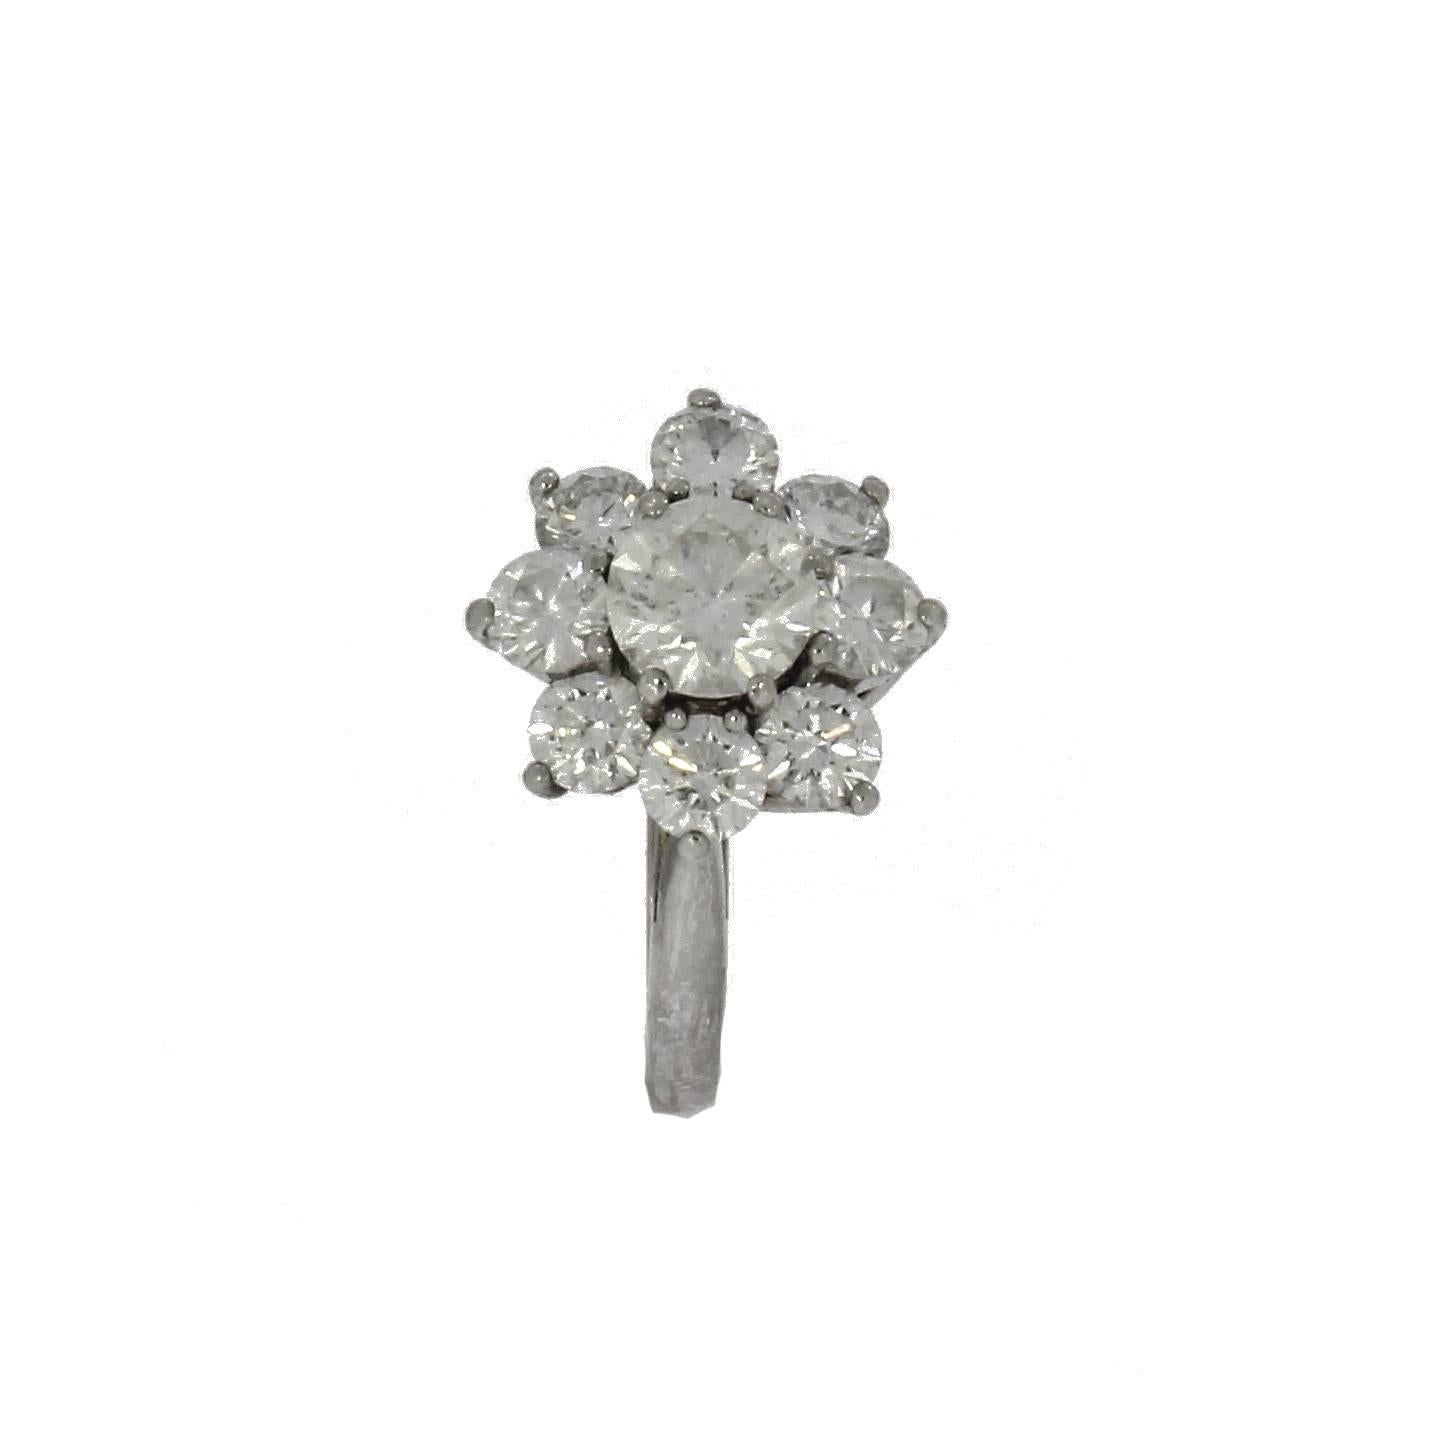 Platinum Bolero Design Diamond Cluster Ring by Boodles, 1.95 Carat In Excellent Condition For Sale In Epsom, Surrey